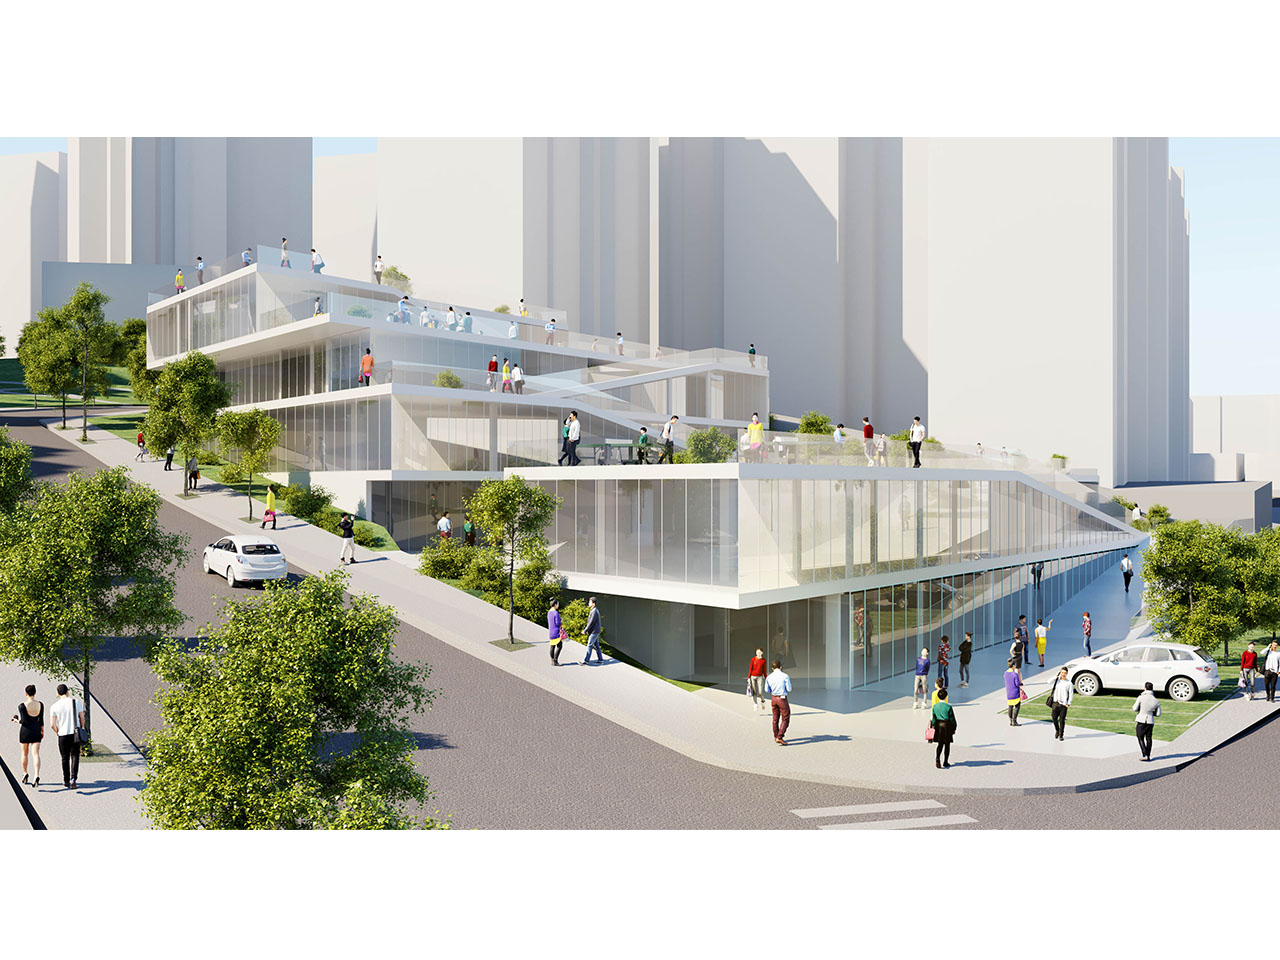 North East Seoul Arts Education Center for Youth & Sports Complex